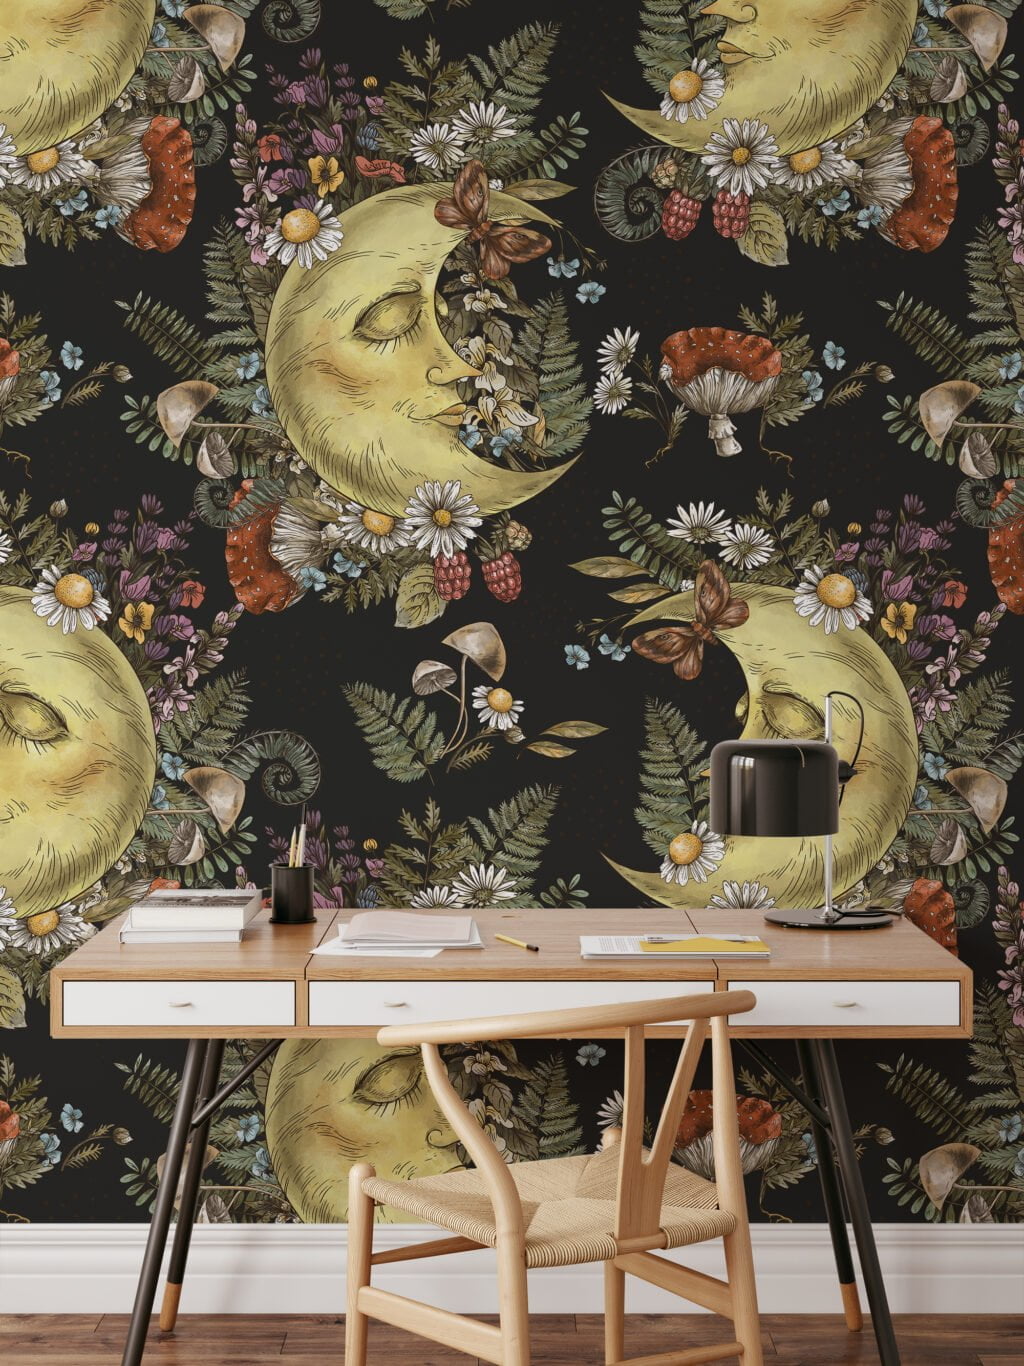 Mystical Floral Moon With Face On A Dark Background Illustration Wallpaper, Celestial Forest Peel & Stick Wall Mural